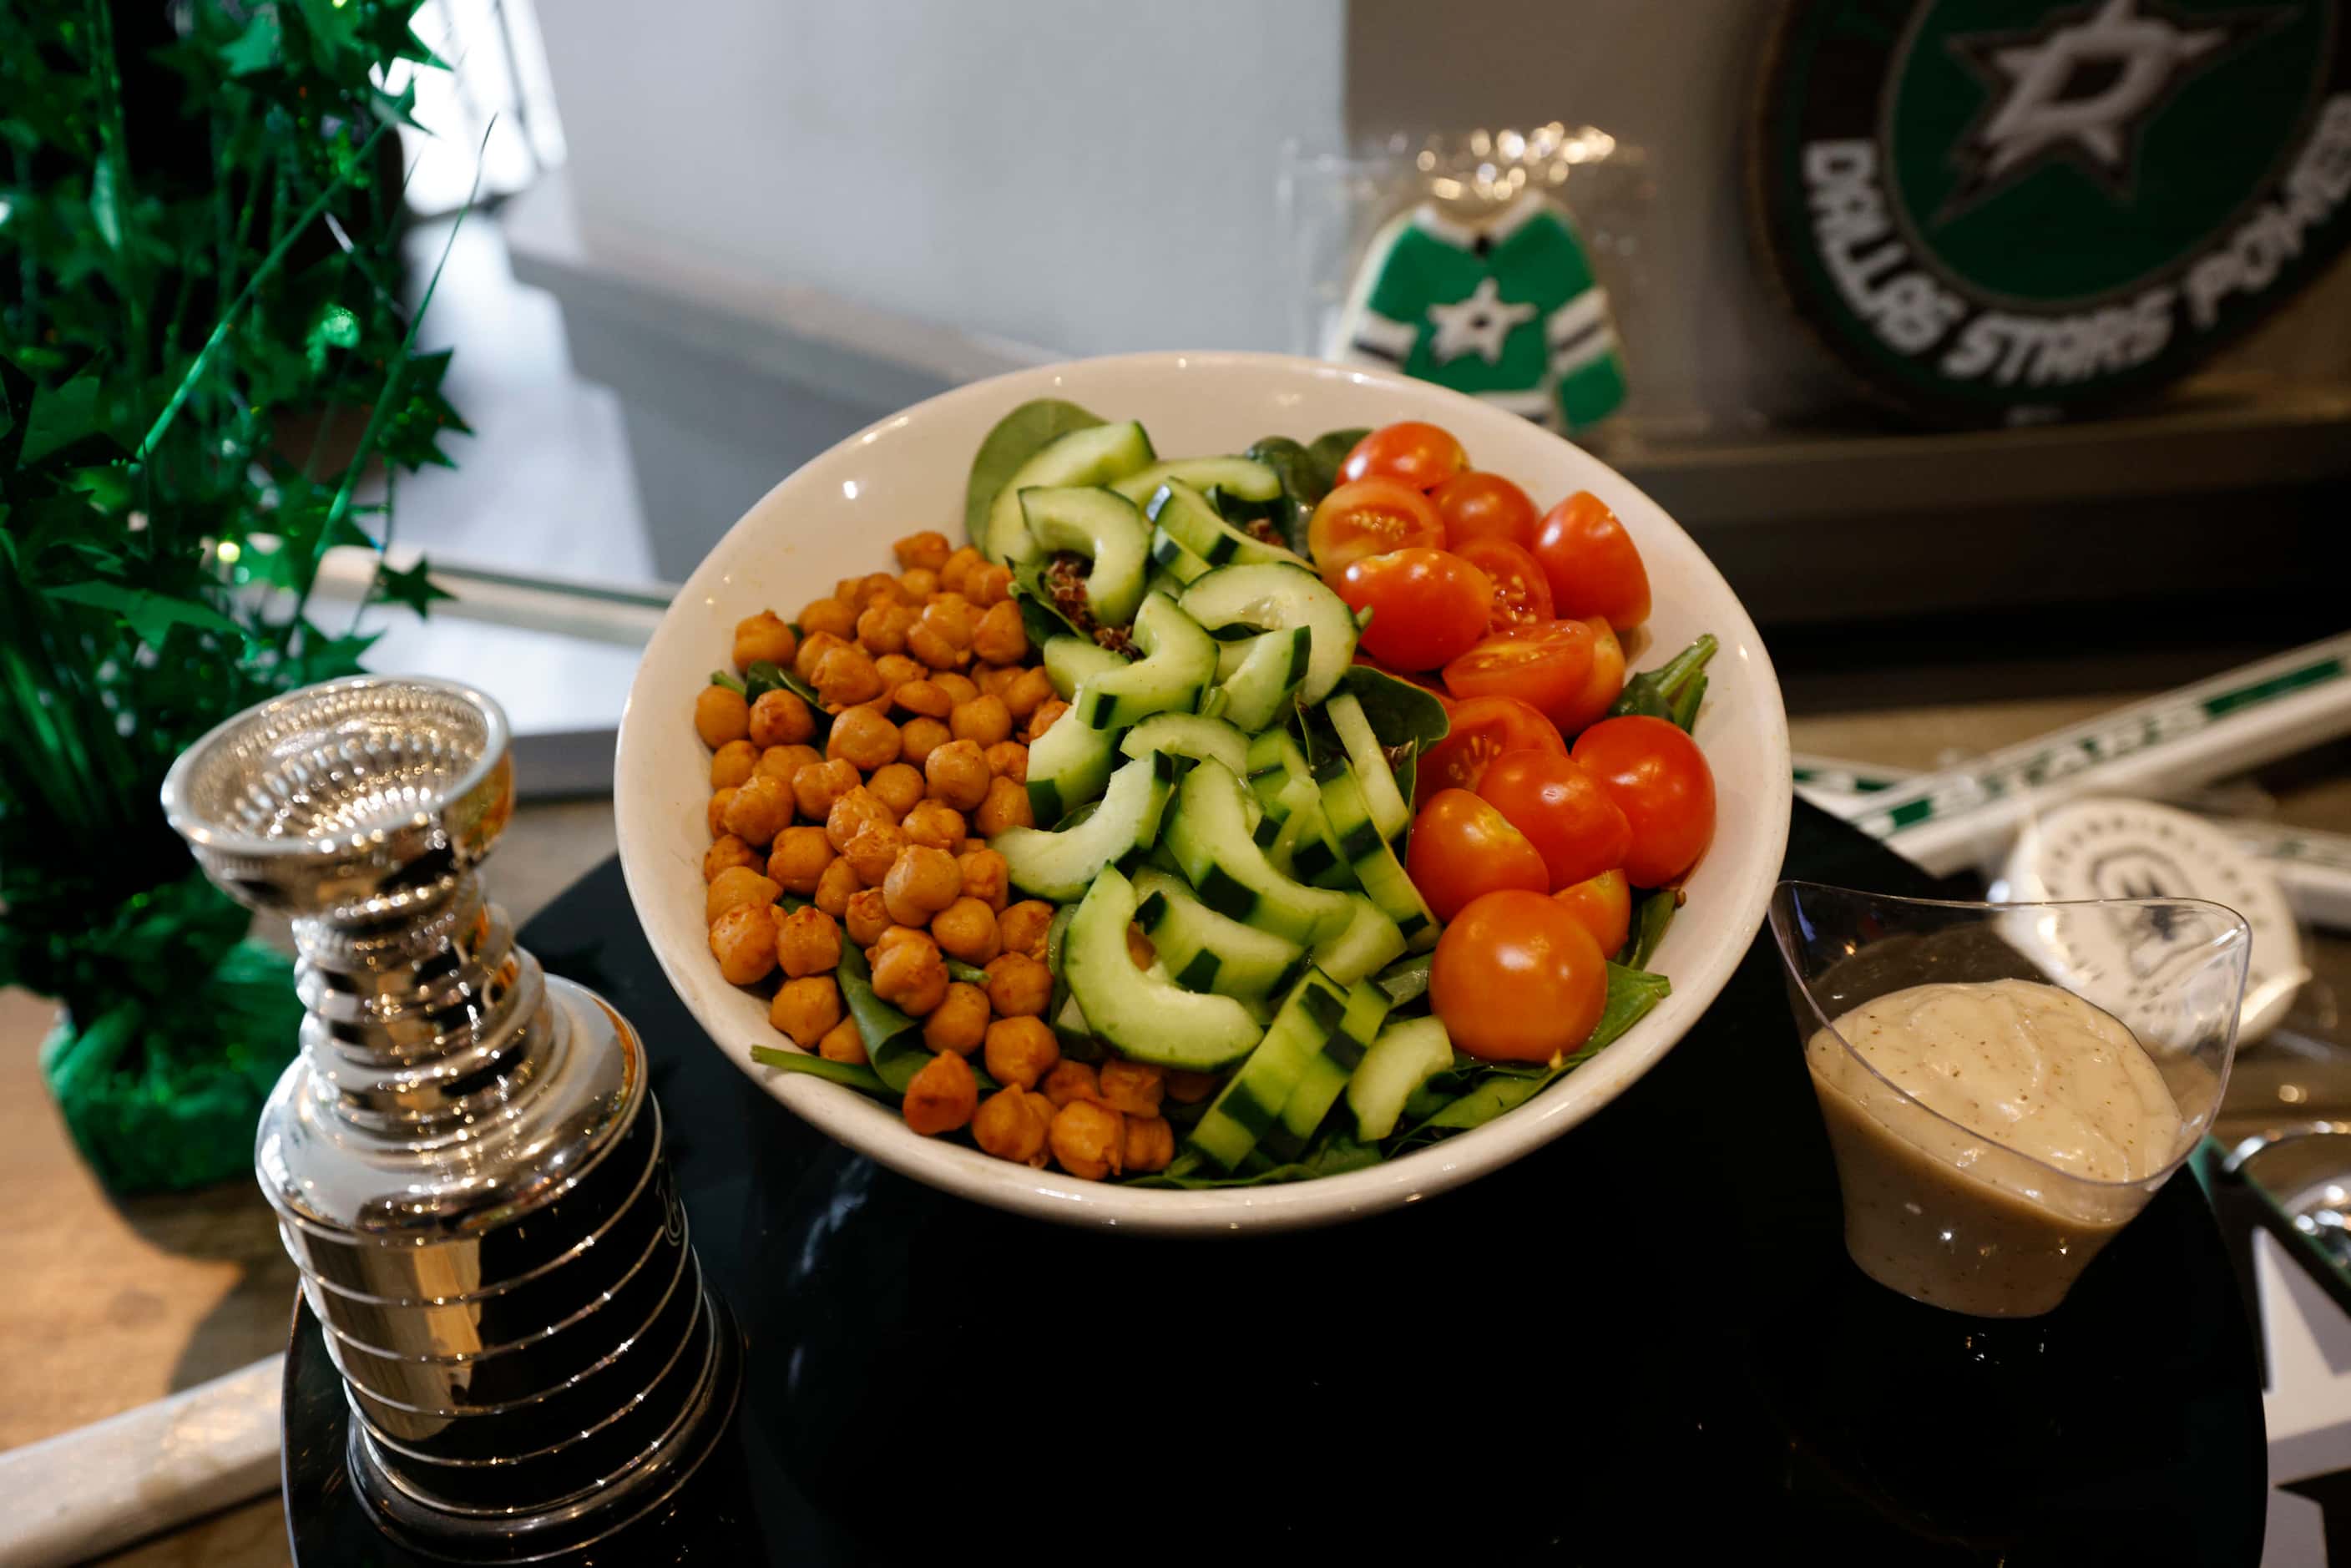 A Vegan Power Bowl is new to the concessions menu at the American Airlines Center in Dallas.